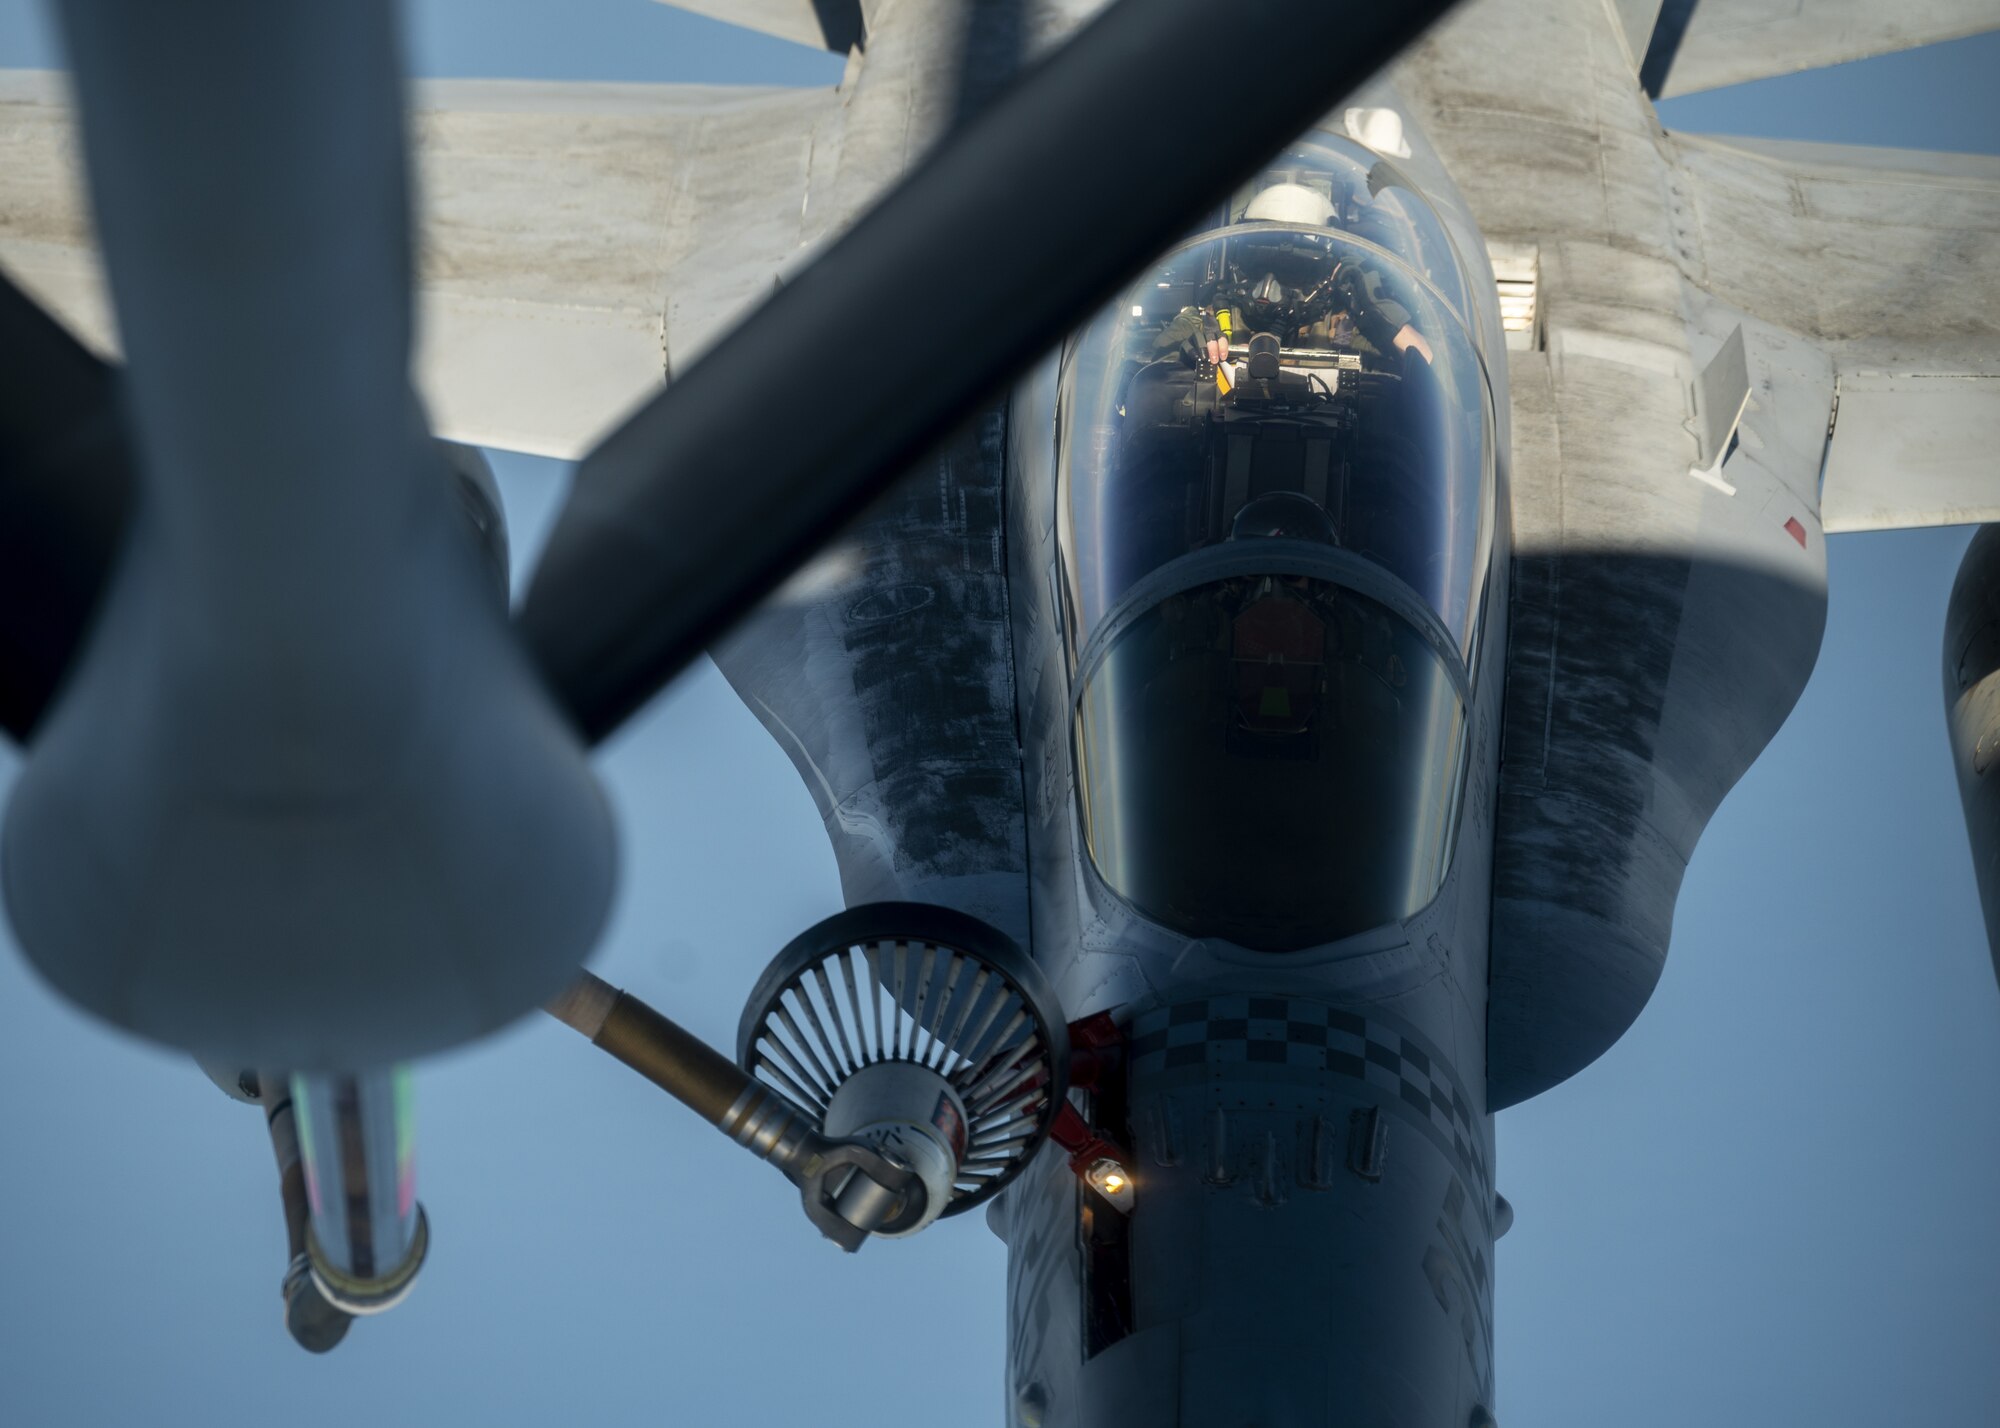 A U.S. Marine Corps F/A-18C Hornet is refueled by a U.S. Air Force KC-135 Stratotanker from Fairchild Air Force Base over the Pacific, March 9, 2023. Aircrew from the 384th Air Refueling Squadron conducted an air refueling coronet with Marines from the Marine Fighter Attack Squadron 312, demonstrating the critical role mobility forces have in projecting the joint force anywhere, anytime. (U.S. Air Force photo by Staff Sgt. Lawrence Sena)